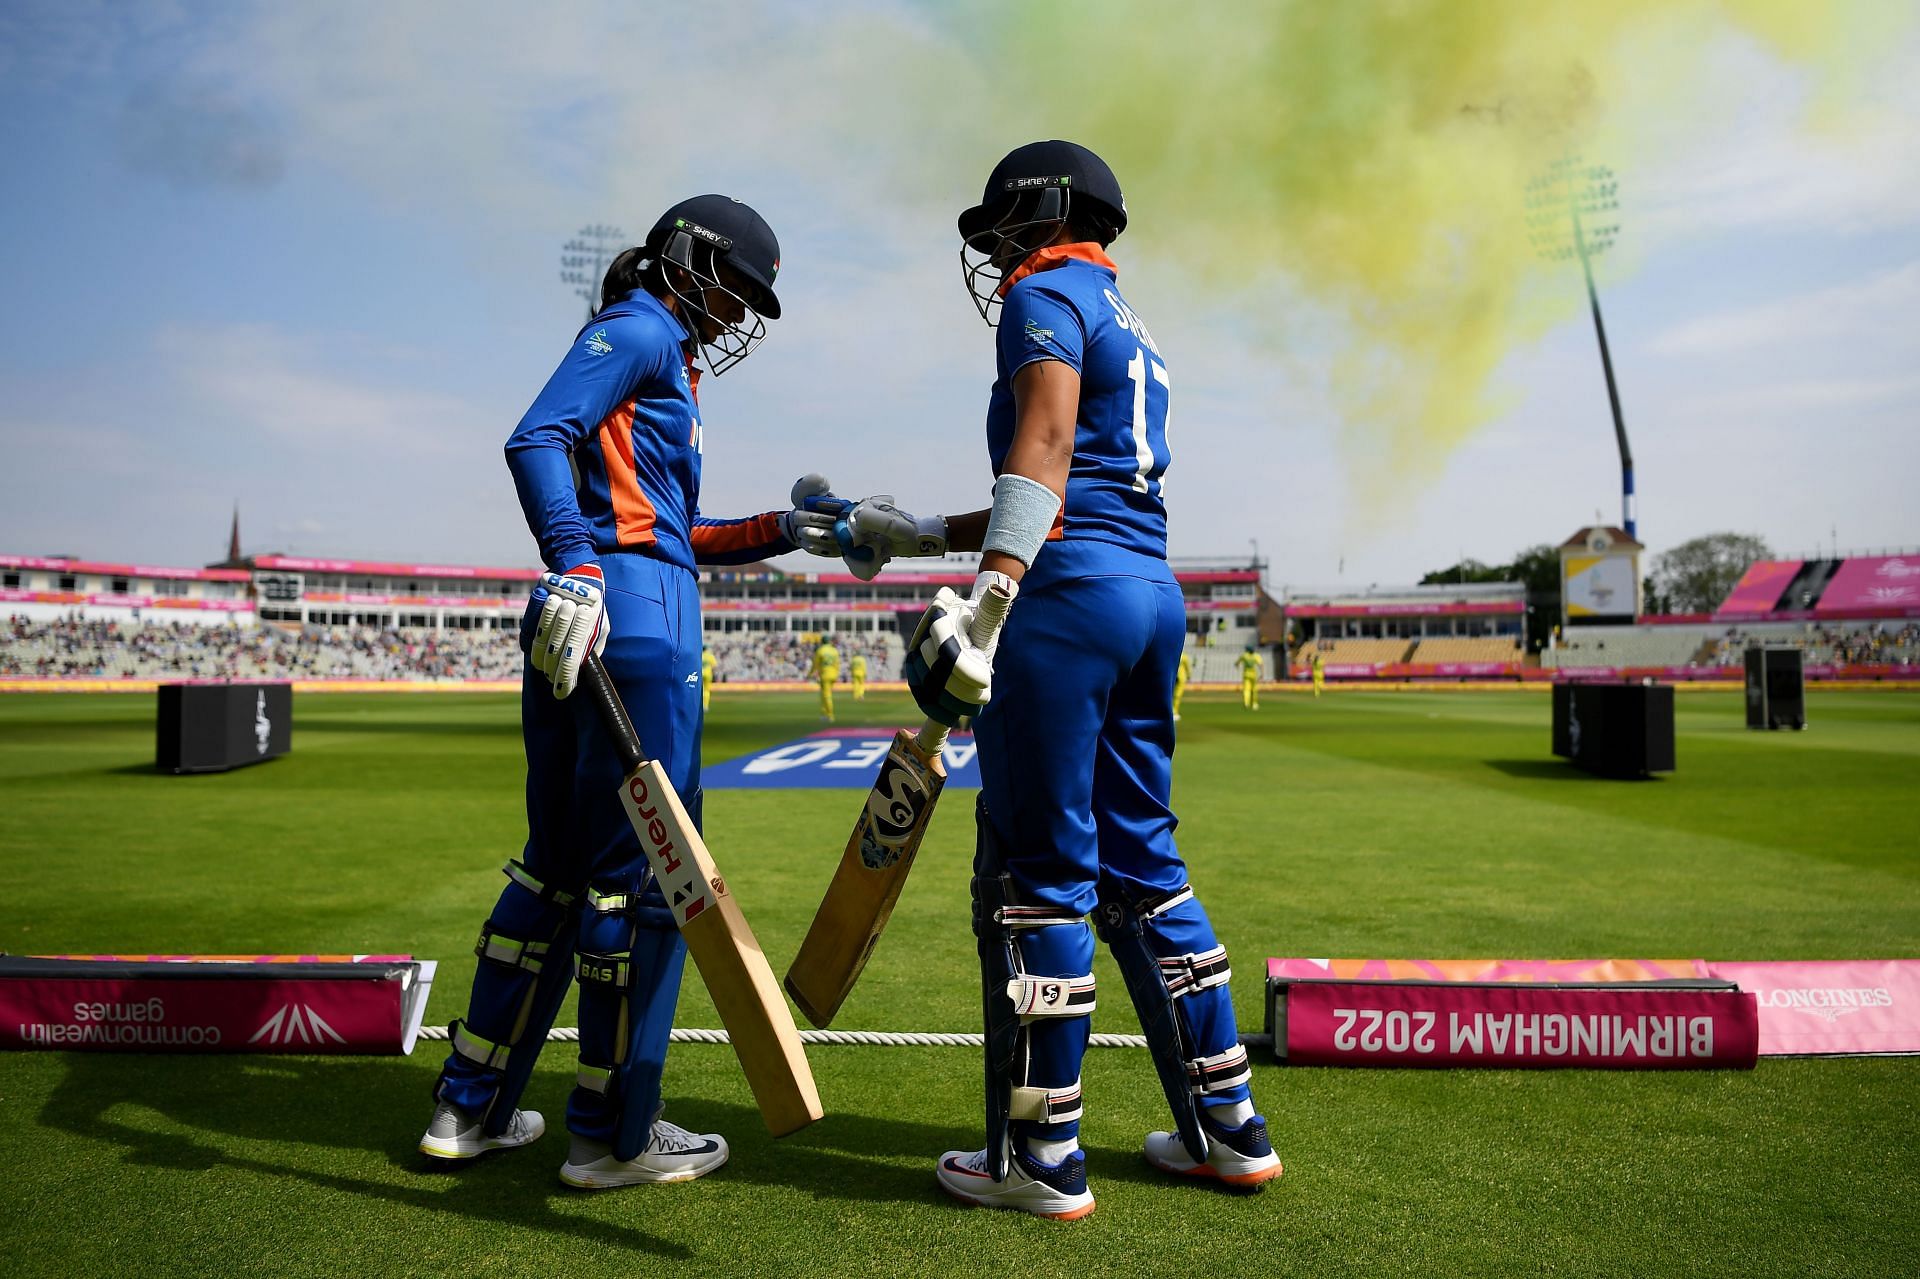 The form of the openers is a concern for Women in Blue.